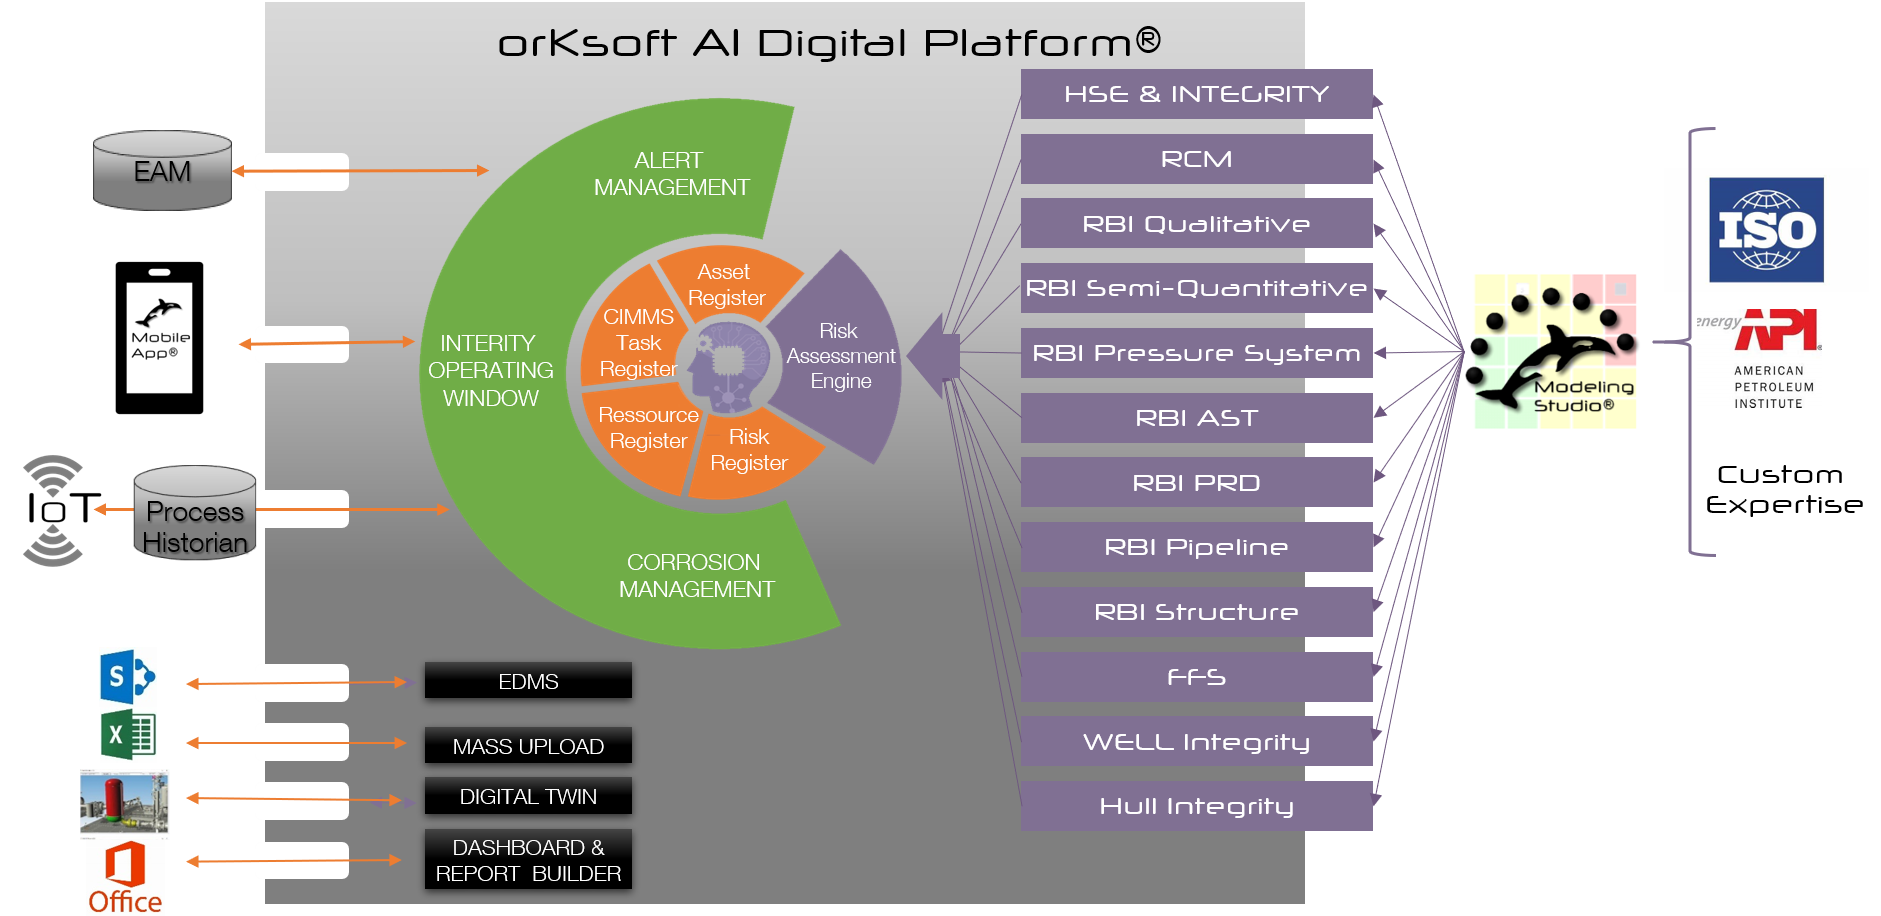 A schema of the architecture of orKsoft®